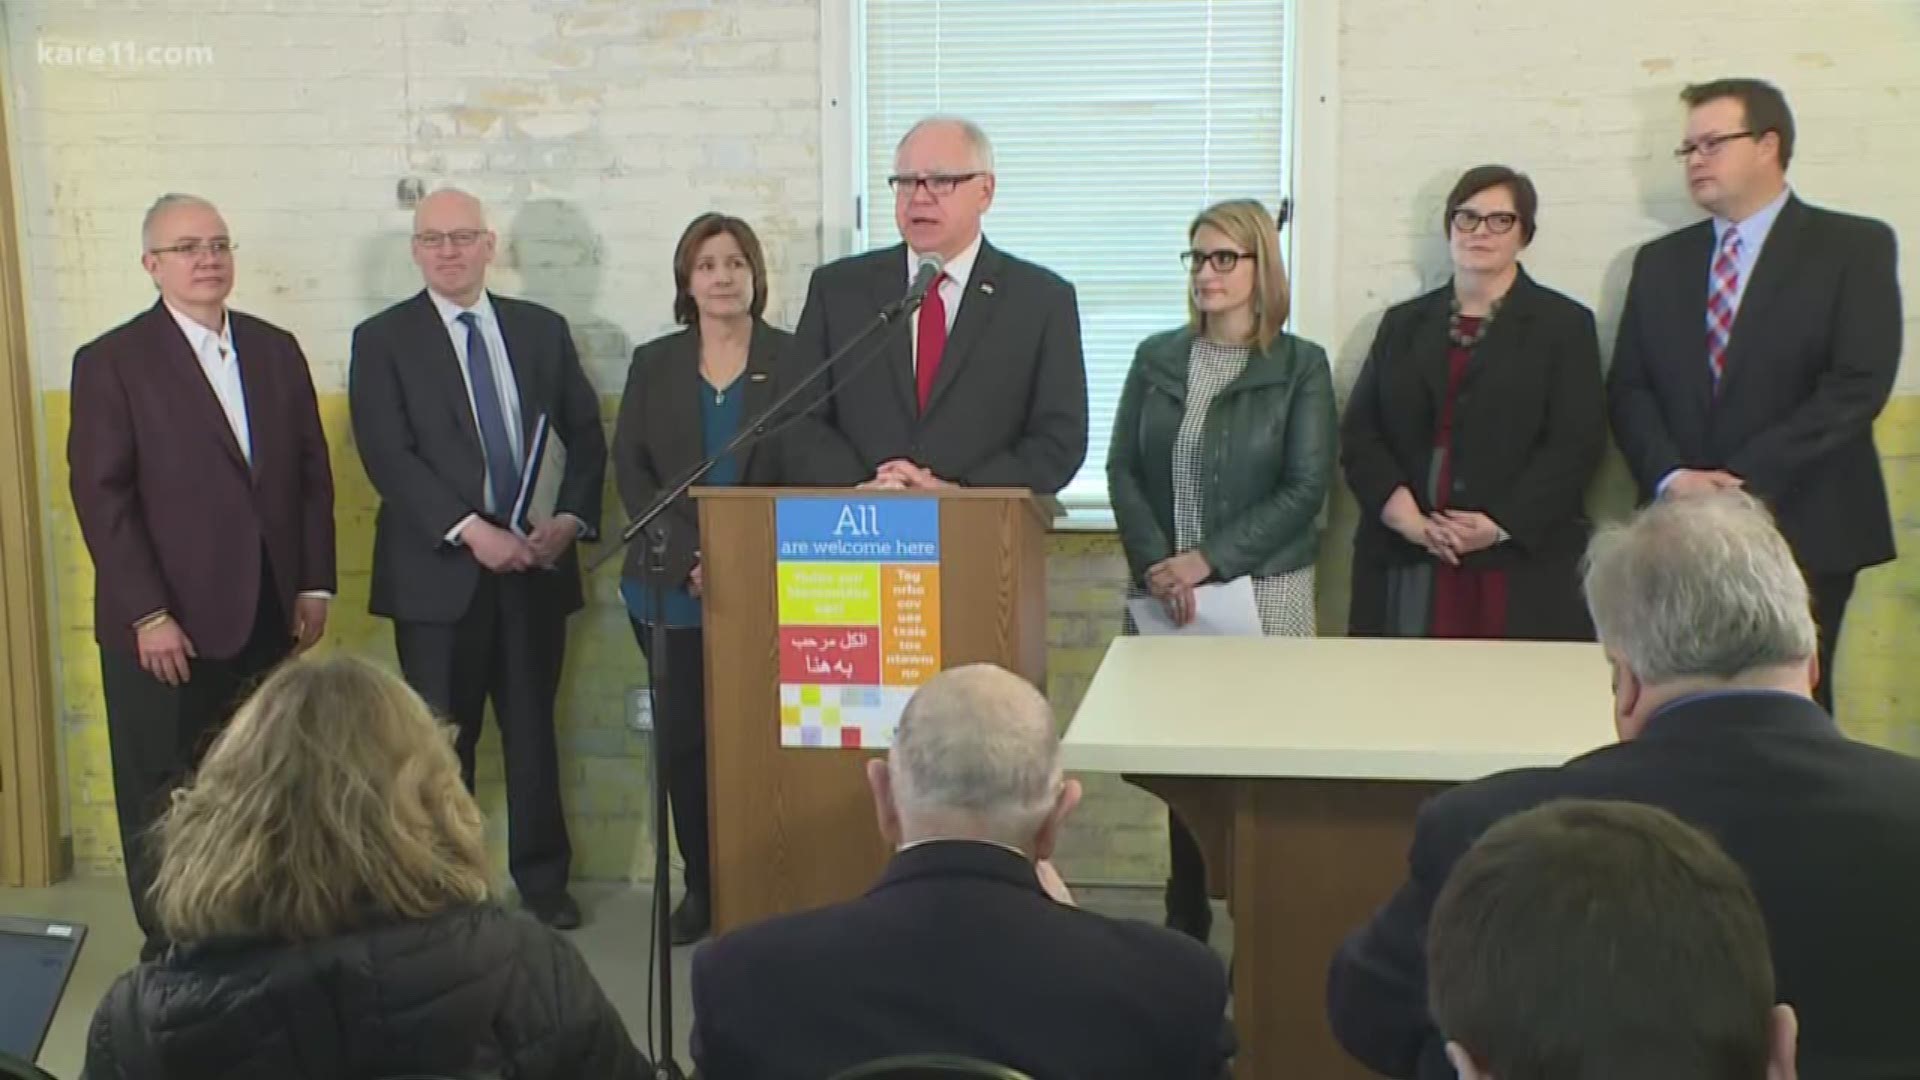 Gov. Tim Walz Tuesday made an ambitious ask of the legislature -- $1.27 billion worth of public works construction projects, otherwise known as the 2019 bonding request.  The big ticket items include $300 million for higher education and $150 million for affordable housing. Walz said the timing's right to make these investments, because of low interest rates and the state's exceptional bond rating.